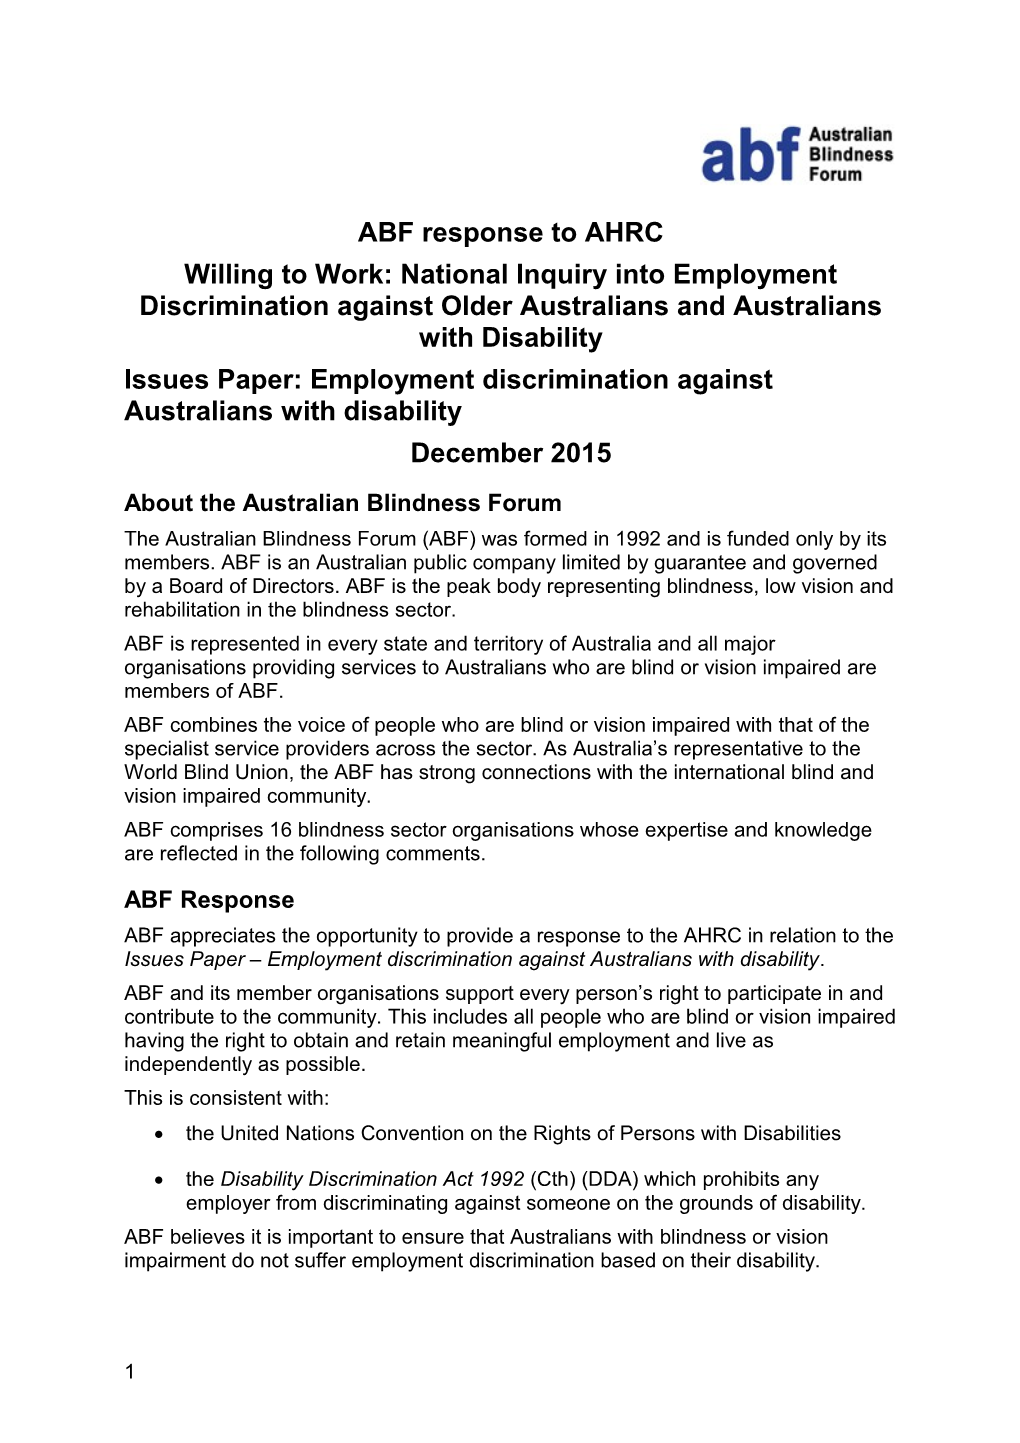 Issues Paper: Employment Discrimination Against Australians with Disability